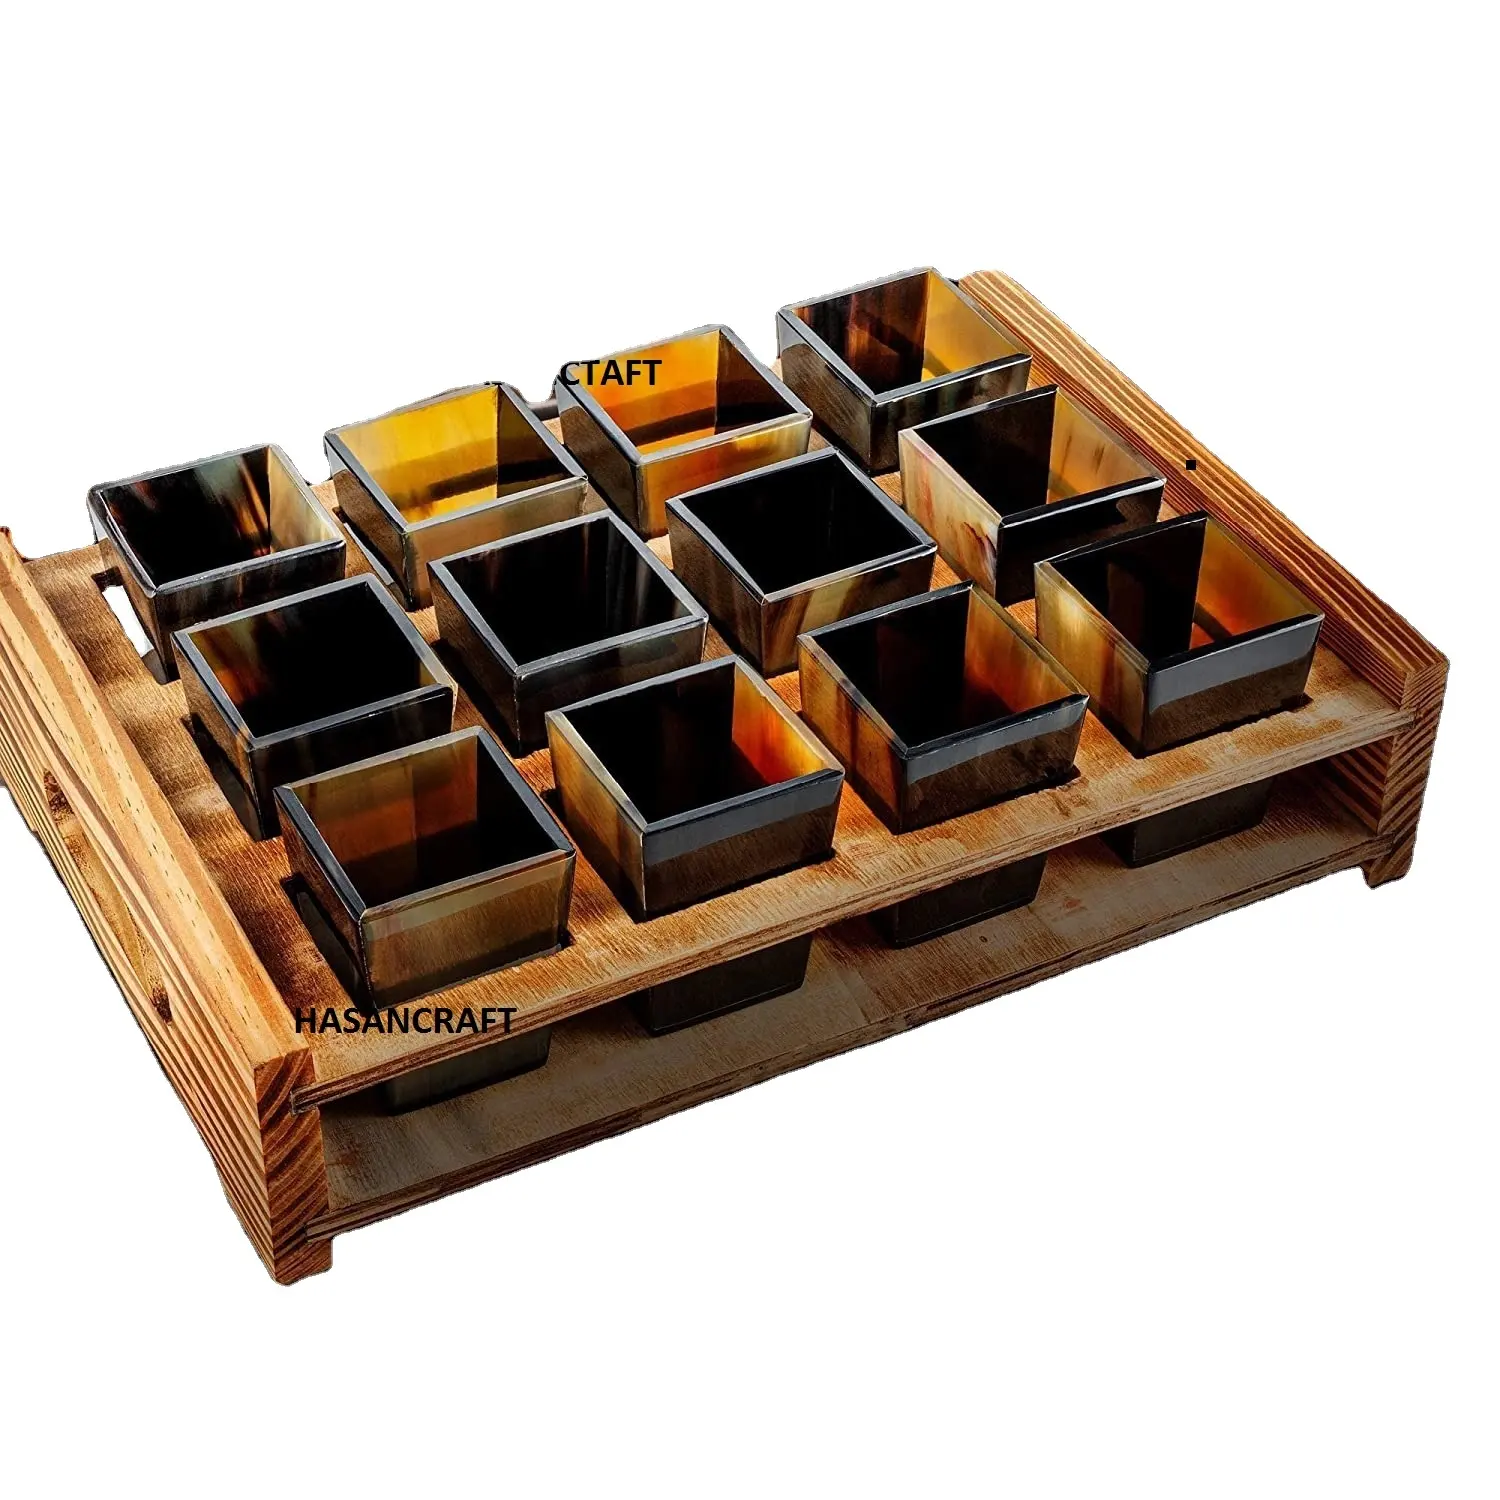 Handmade Viking Horn Shot Glasses Authentic Medieval & Nordic Inspired Drink ware with Wooden Serving and Storage Tray Handmade